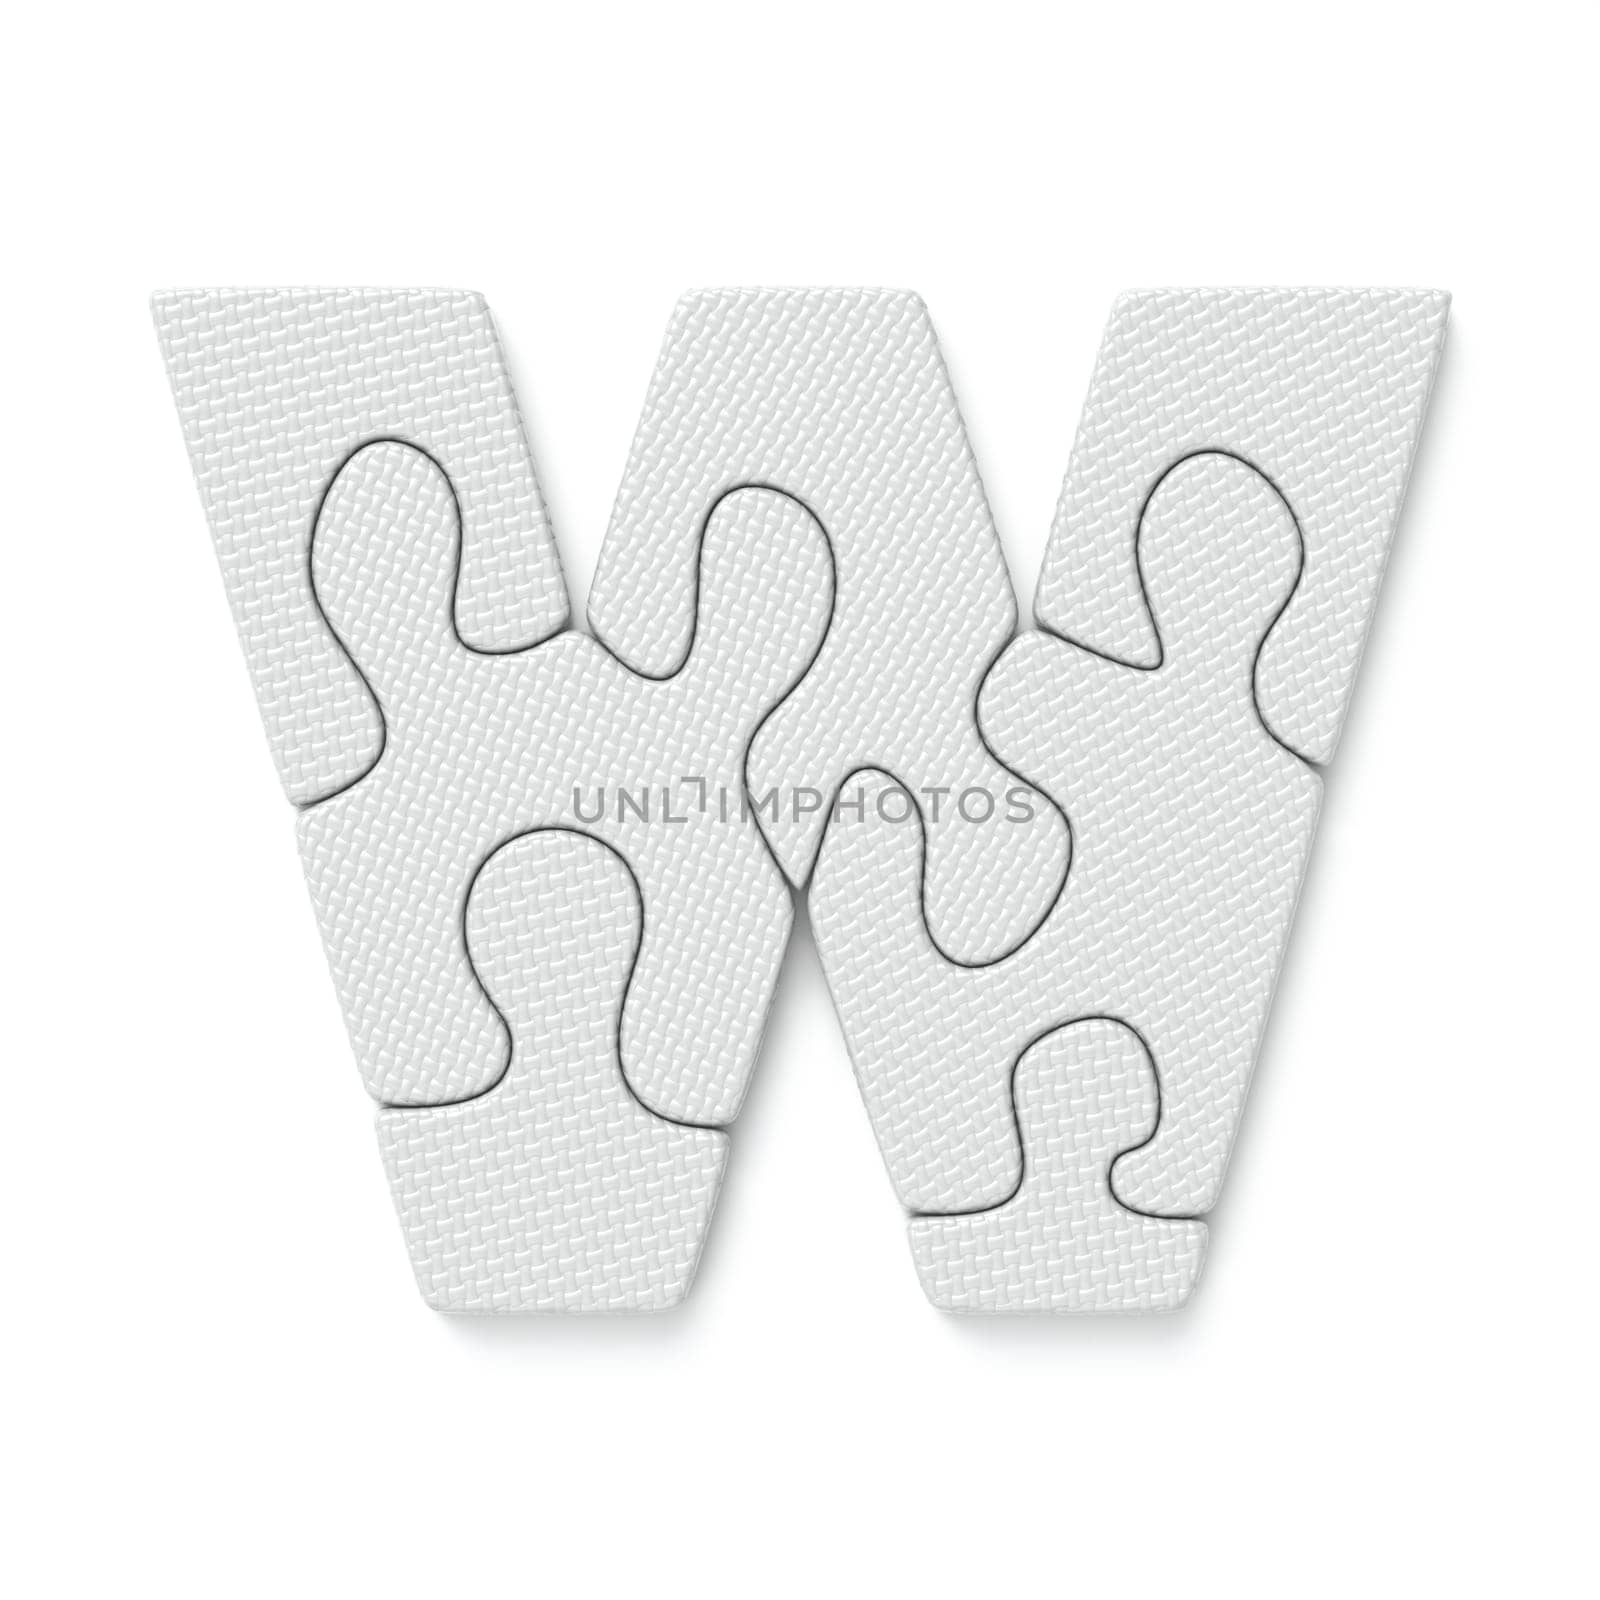 White jigsaw puzzle font Letter W 3D rendering illustration isolated on white background